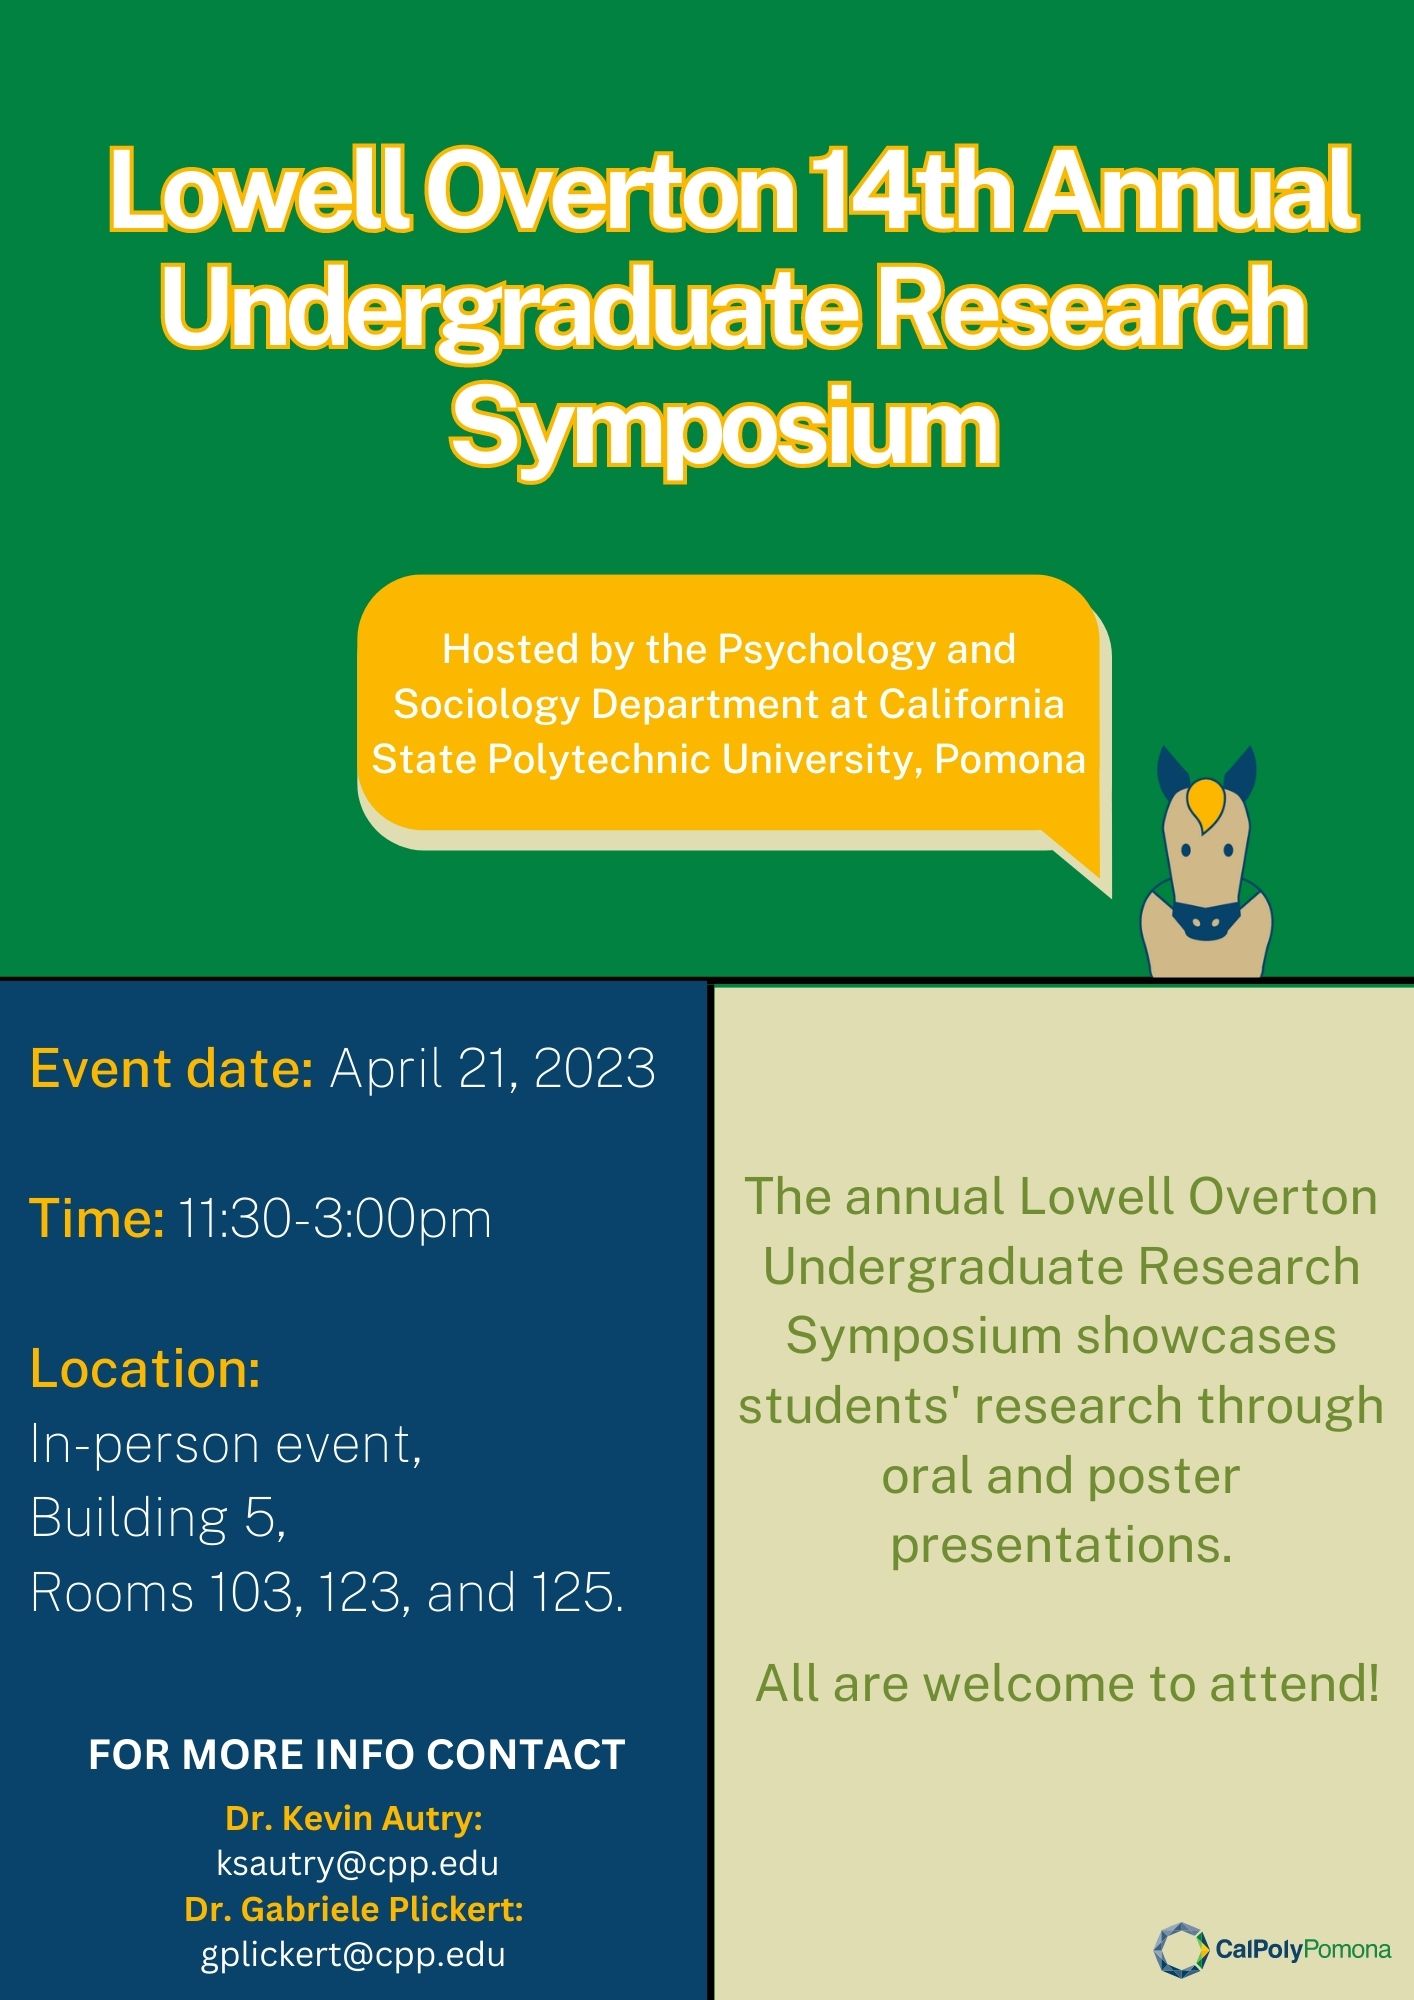 invite to attend the Lowell Overton Symposium